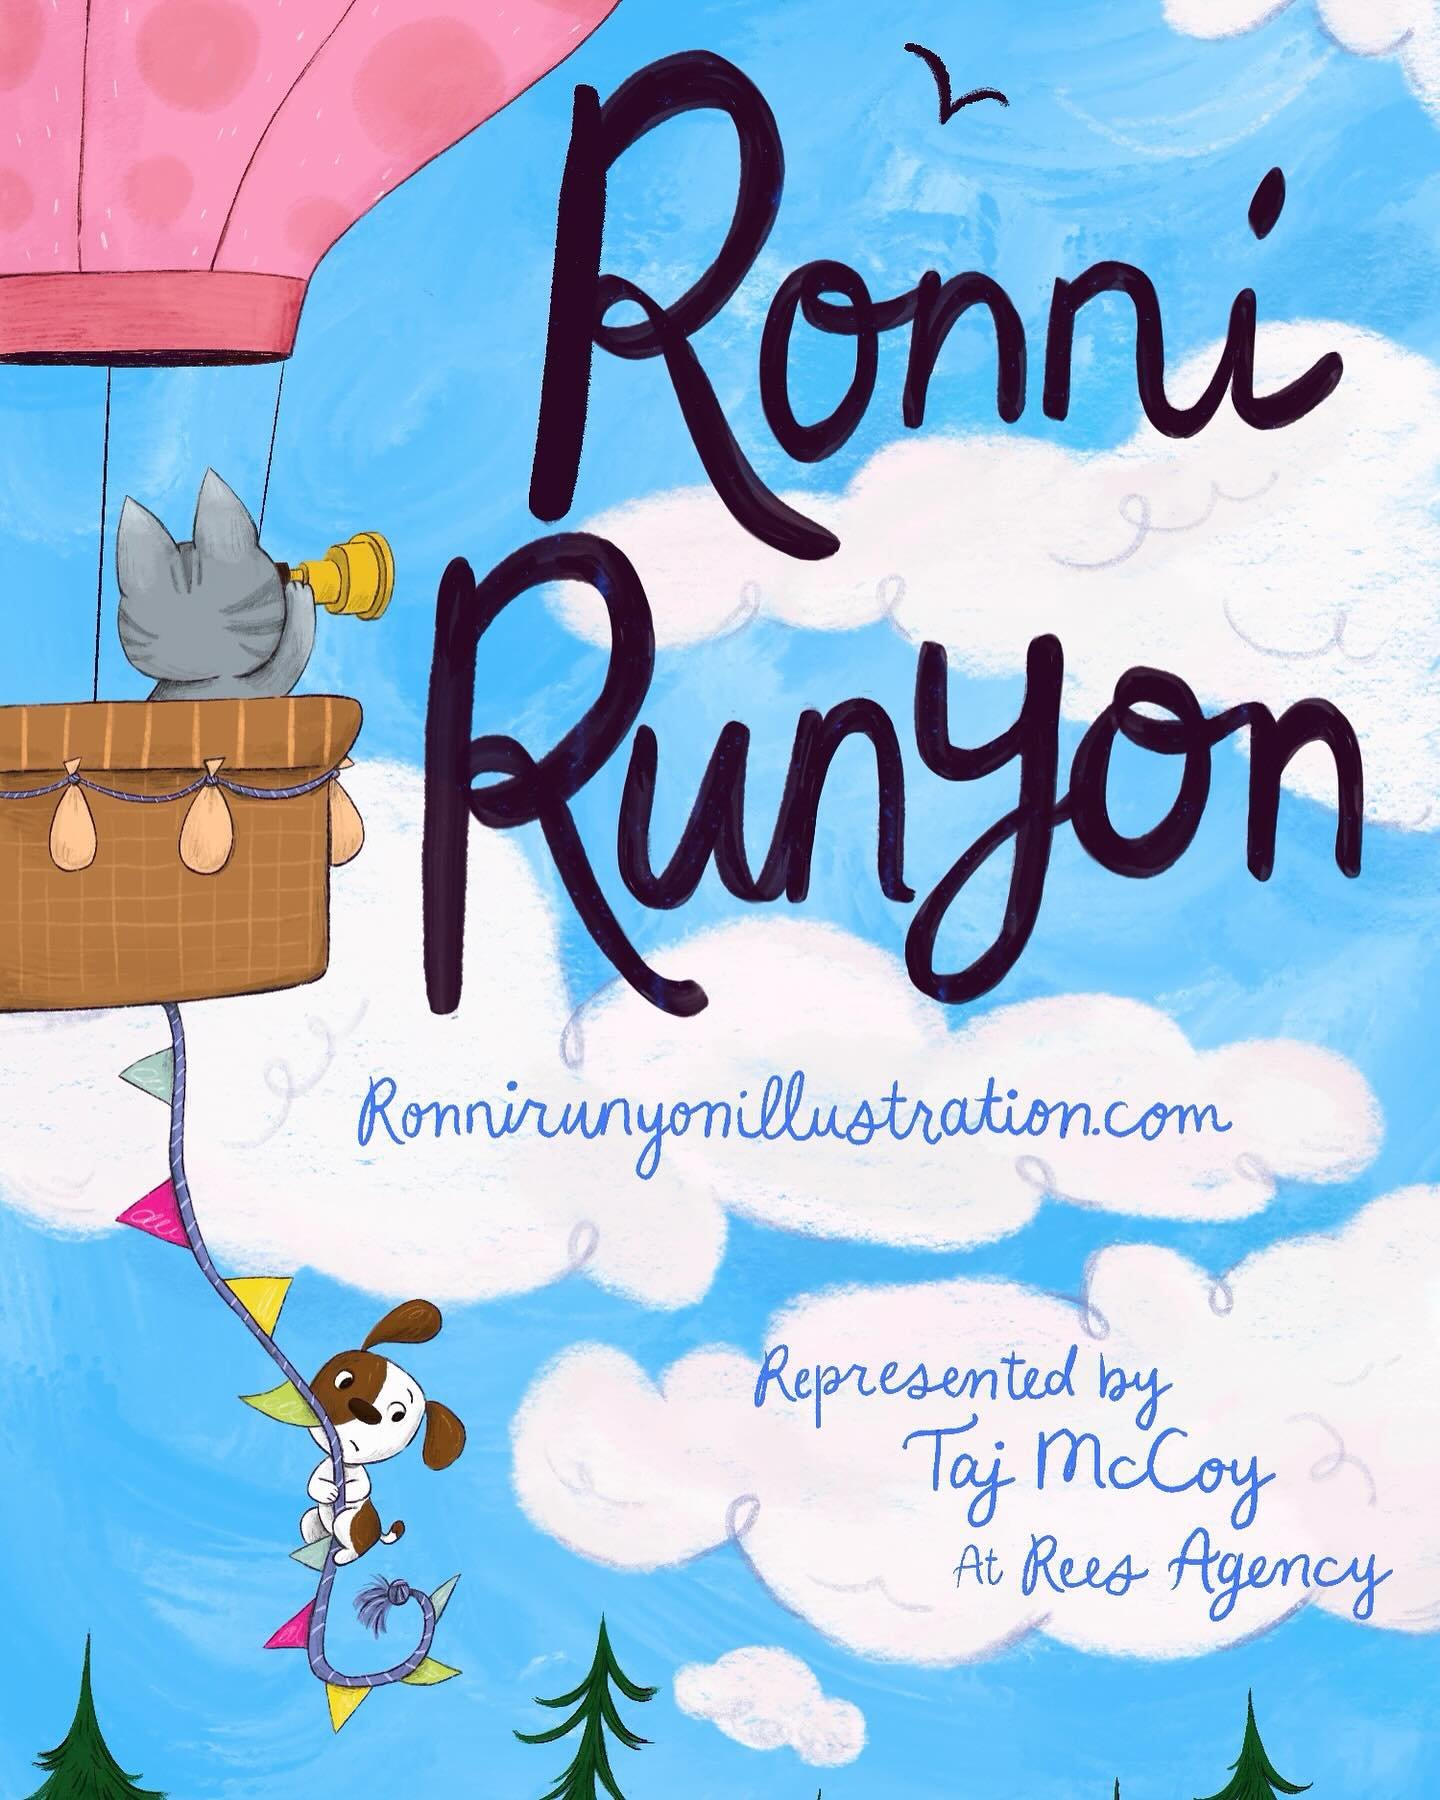 It's #Kidlitartpostcard day once again! I'm Ronni Runyon, and I love to create colorful, fun adventures with my art. I'm open to projects of all kinds! 

Rep'd by Taj McCoy at Rees Agency 📚

ronnirunyonillustration.com, link is in my bio!! 

#kidlit